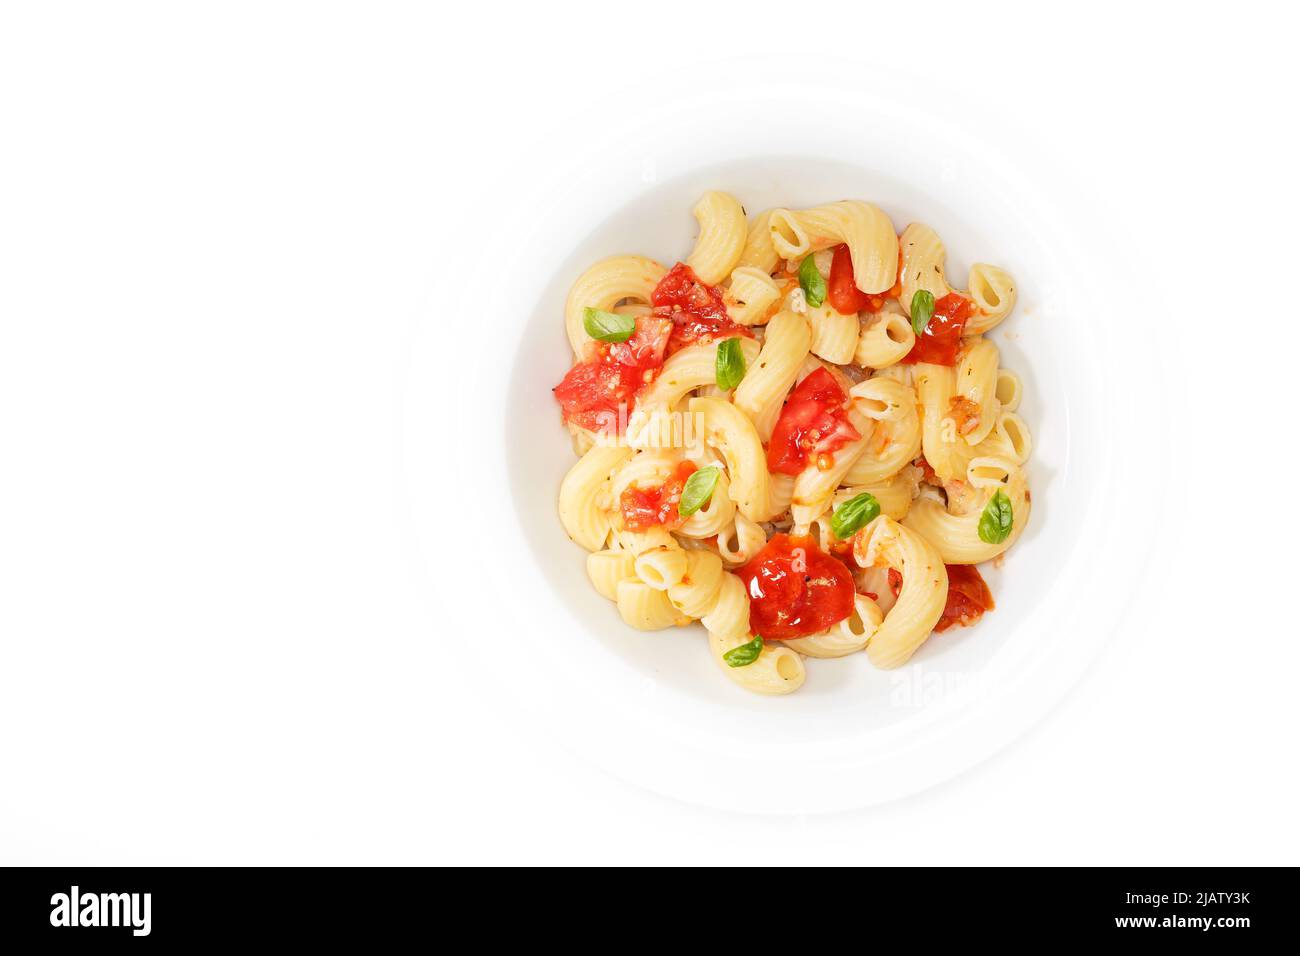 IItalian food background. Cavatappi pasta with tomatoes, spices and herb basil in a white plate. White background. With copy space for your text. Stock Photo